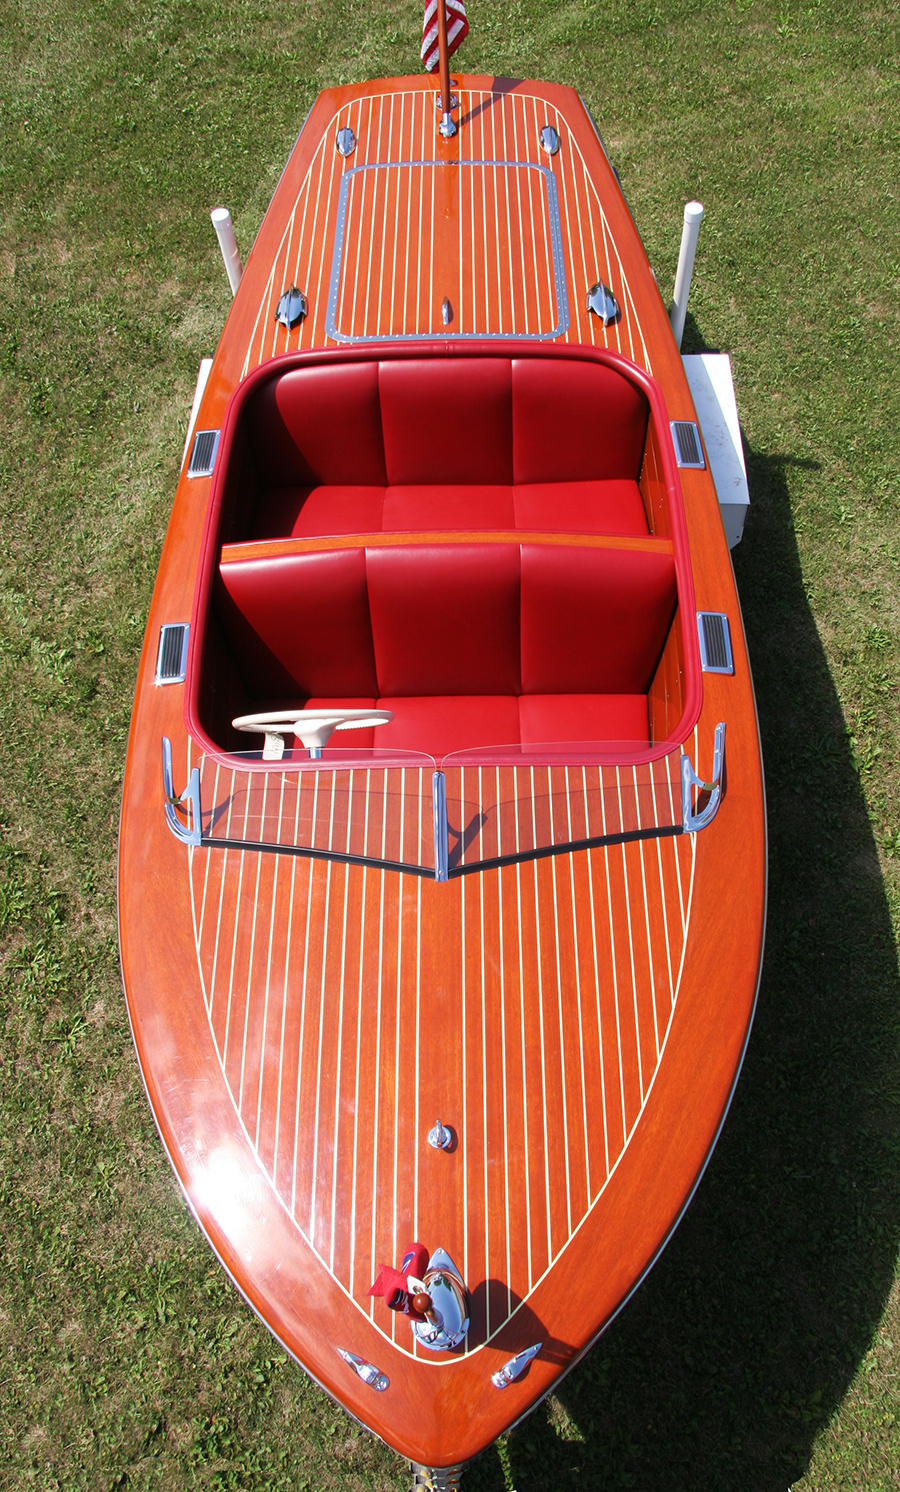 17' Chris Craft Deluxe Runabout